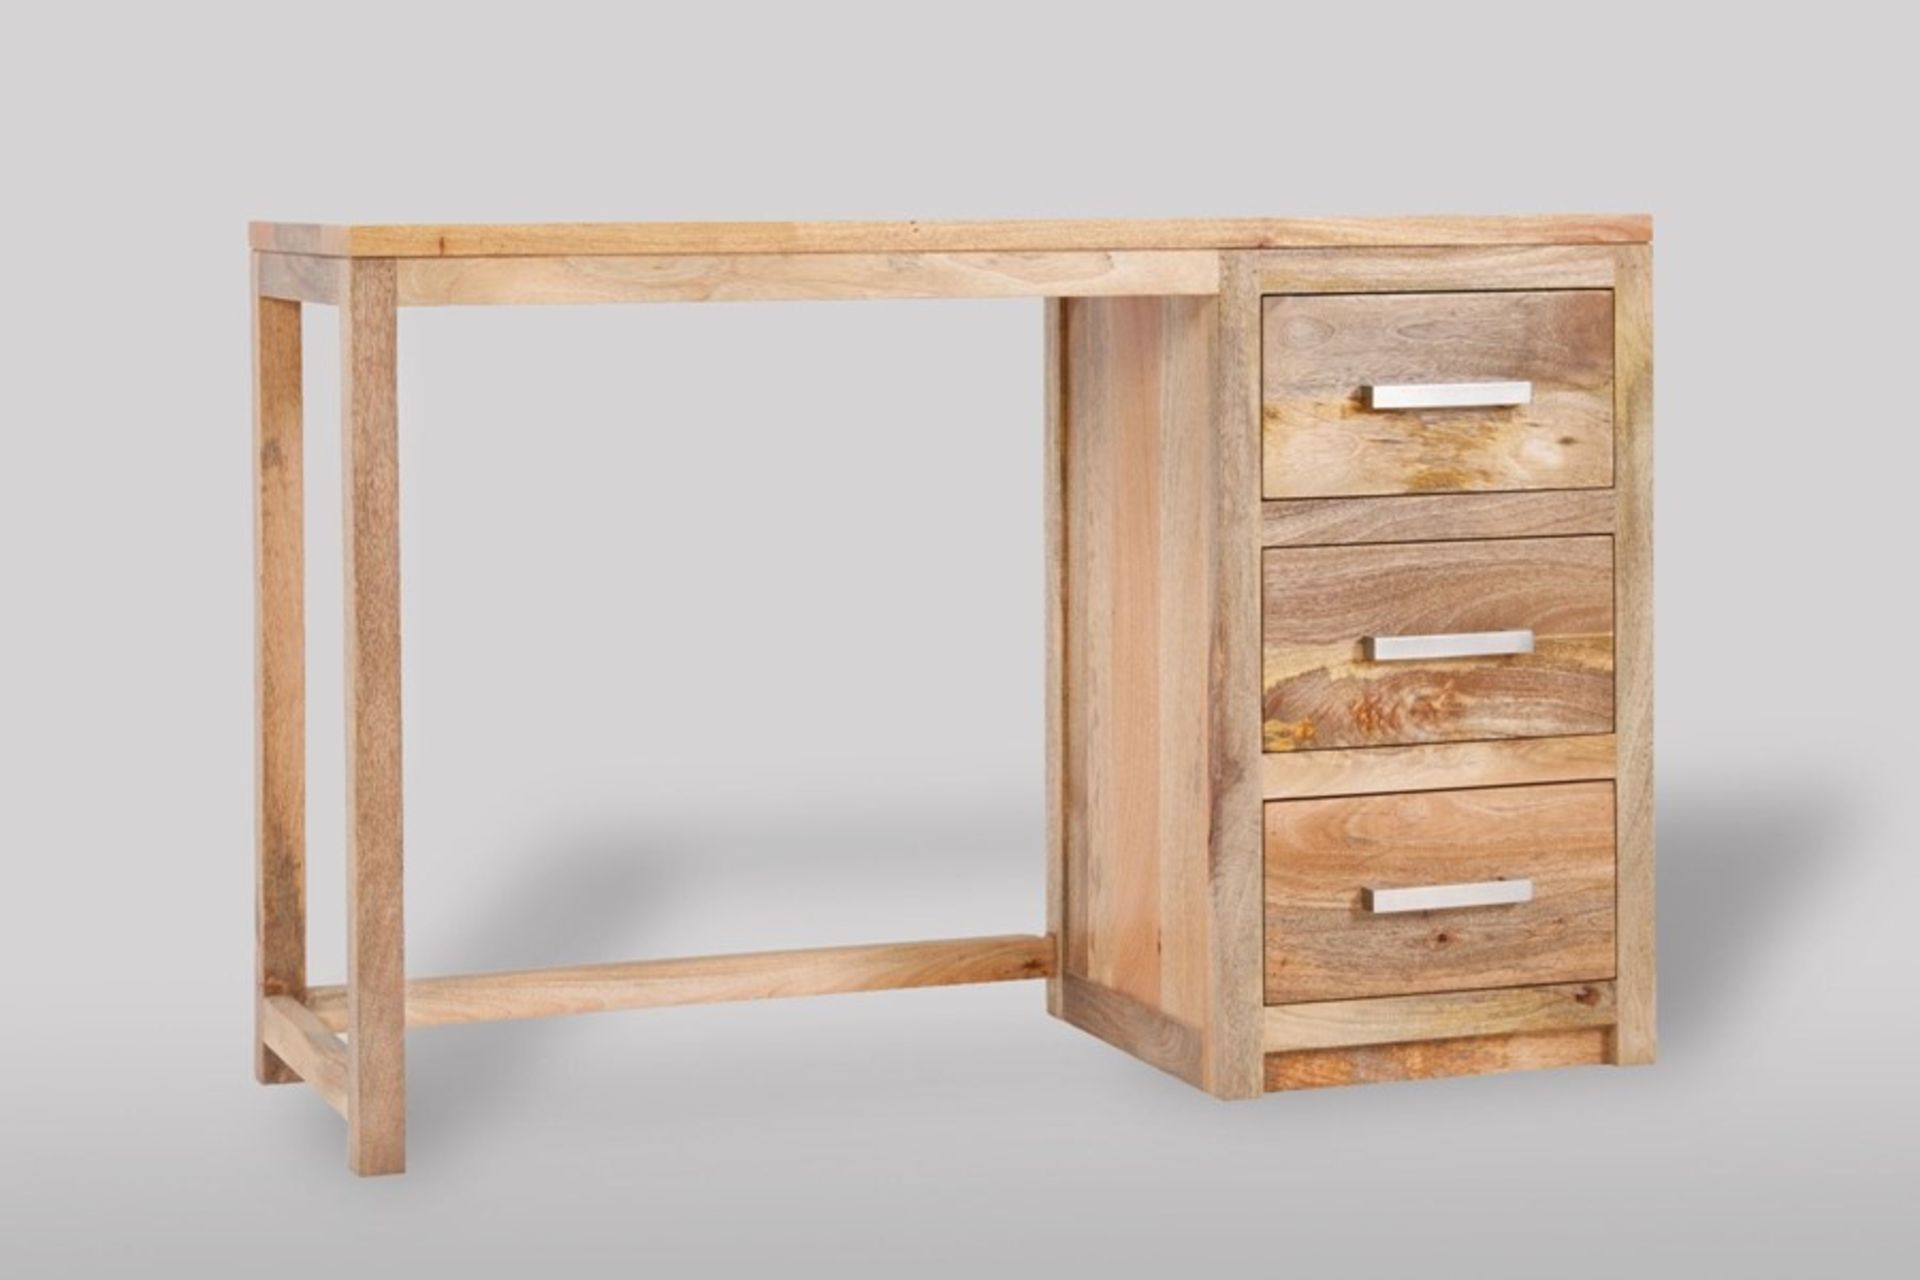 1 GRADE A BOXED BH BOSS MANGO WOOD DRESSING TABLE FULLY ASSEMBLED SOLID WOOD / RRP £289.00